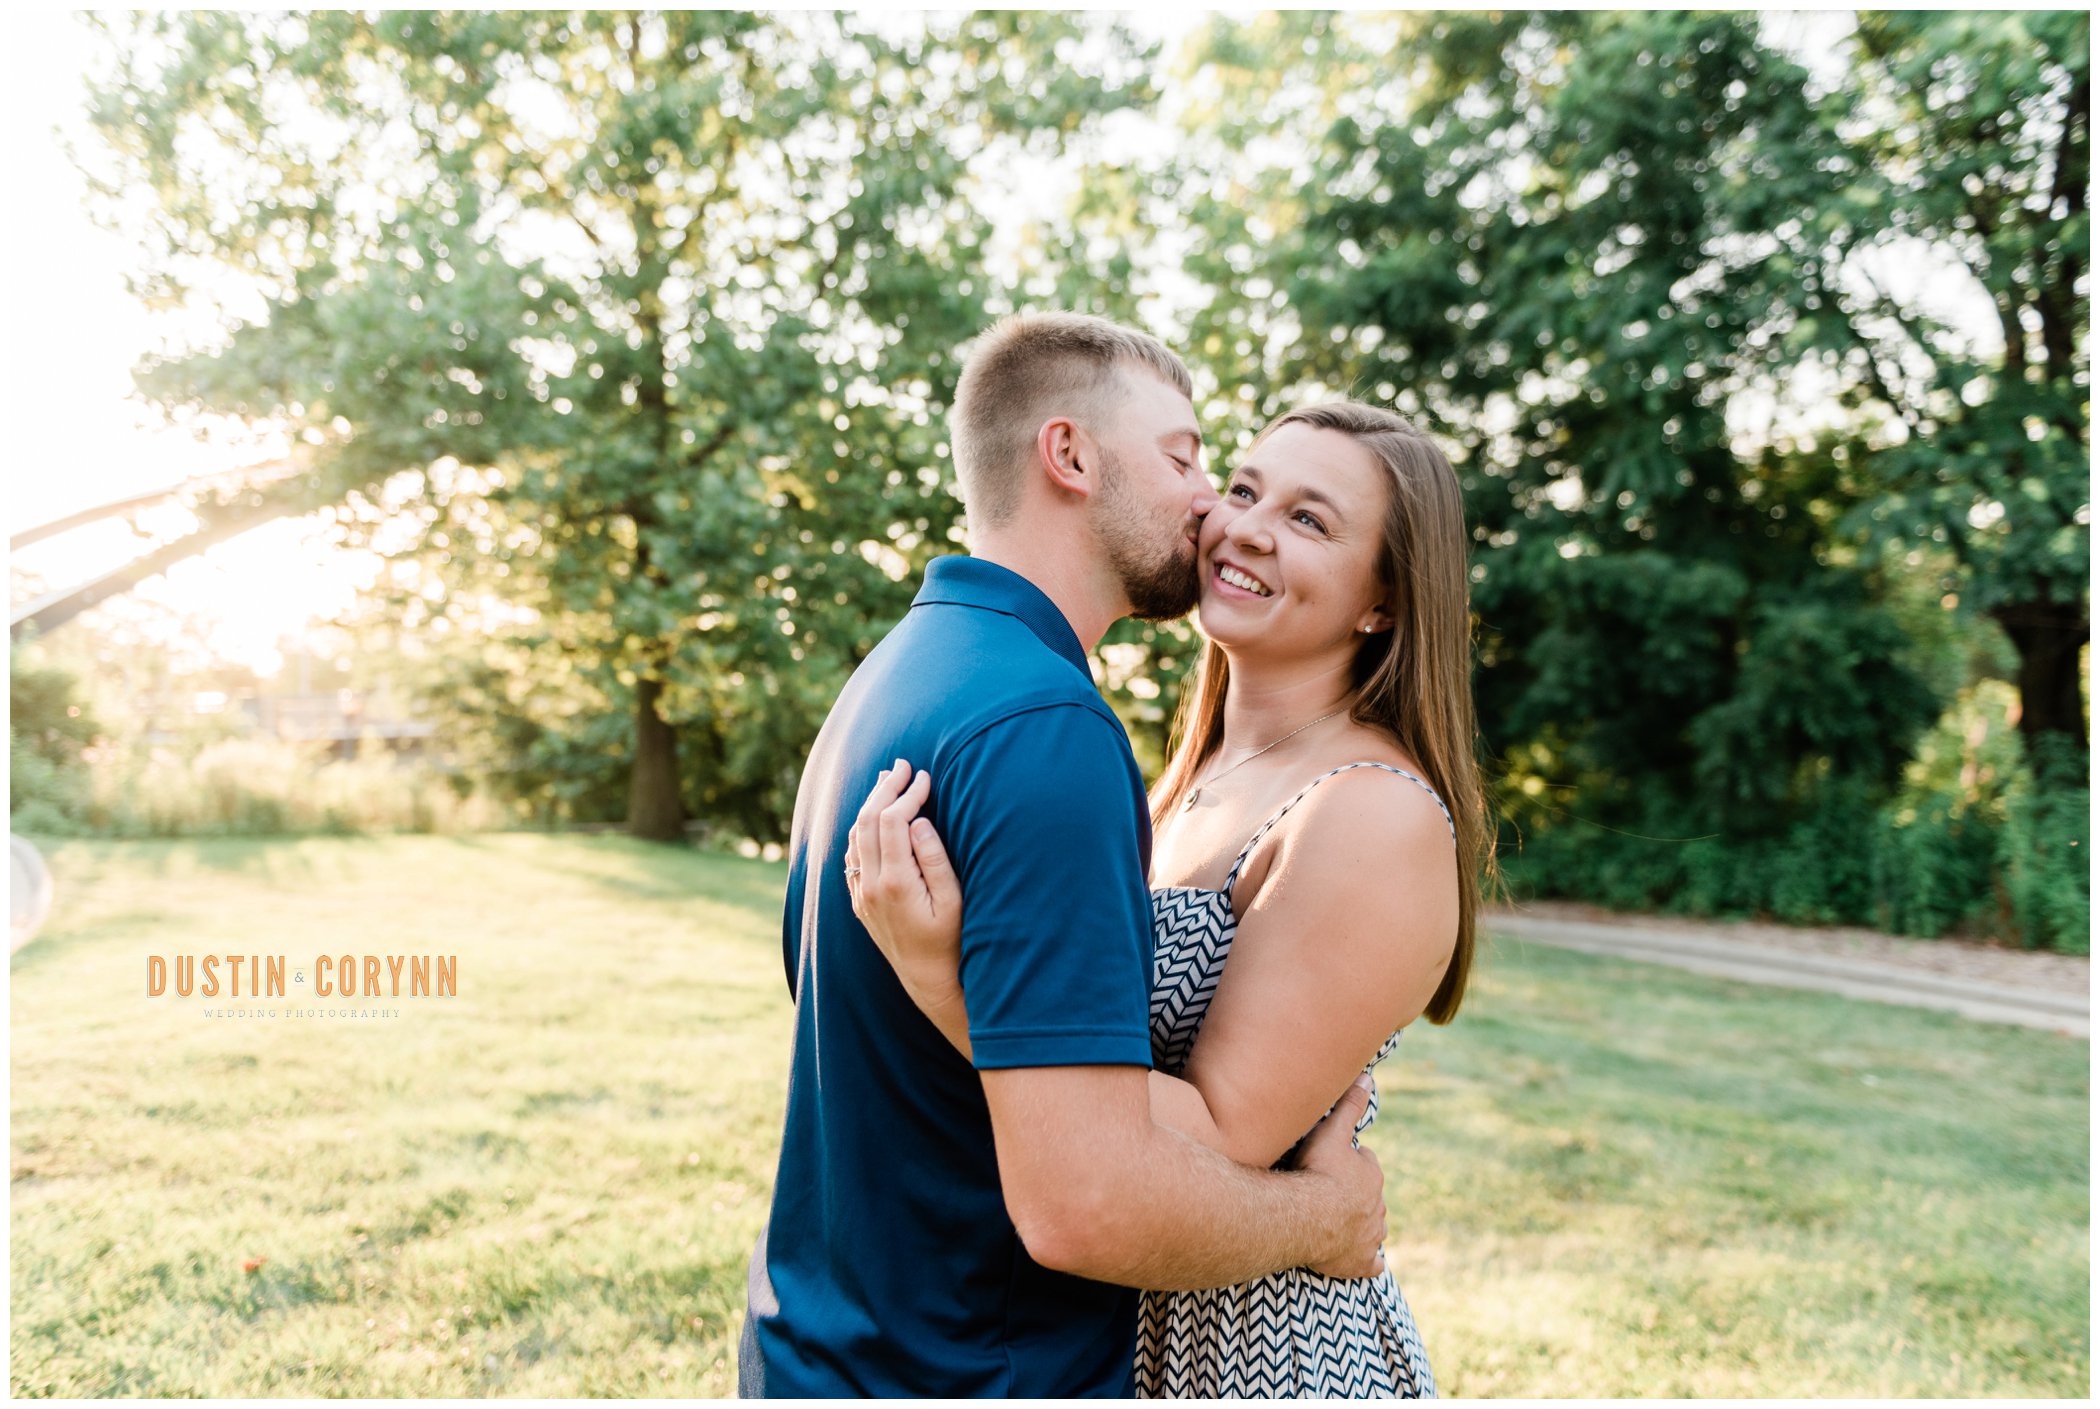 A Kiss on the Cheek at Three Rivers Engagement